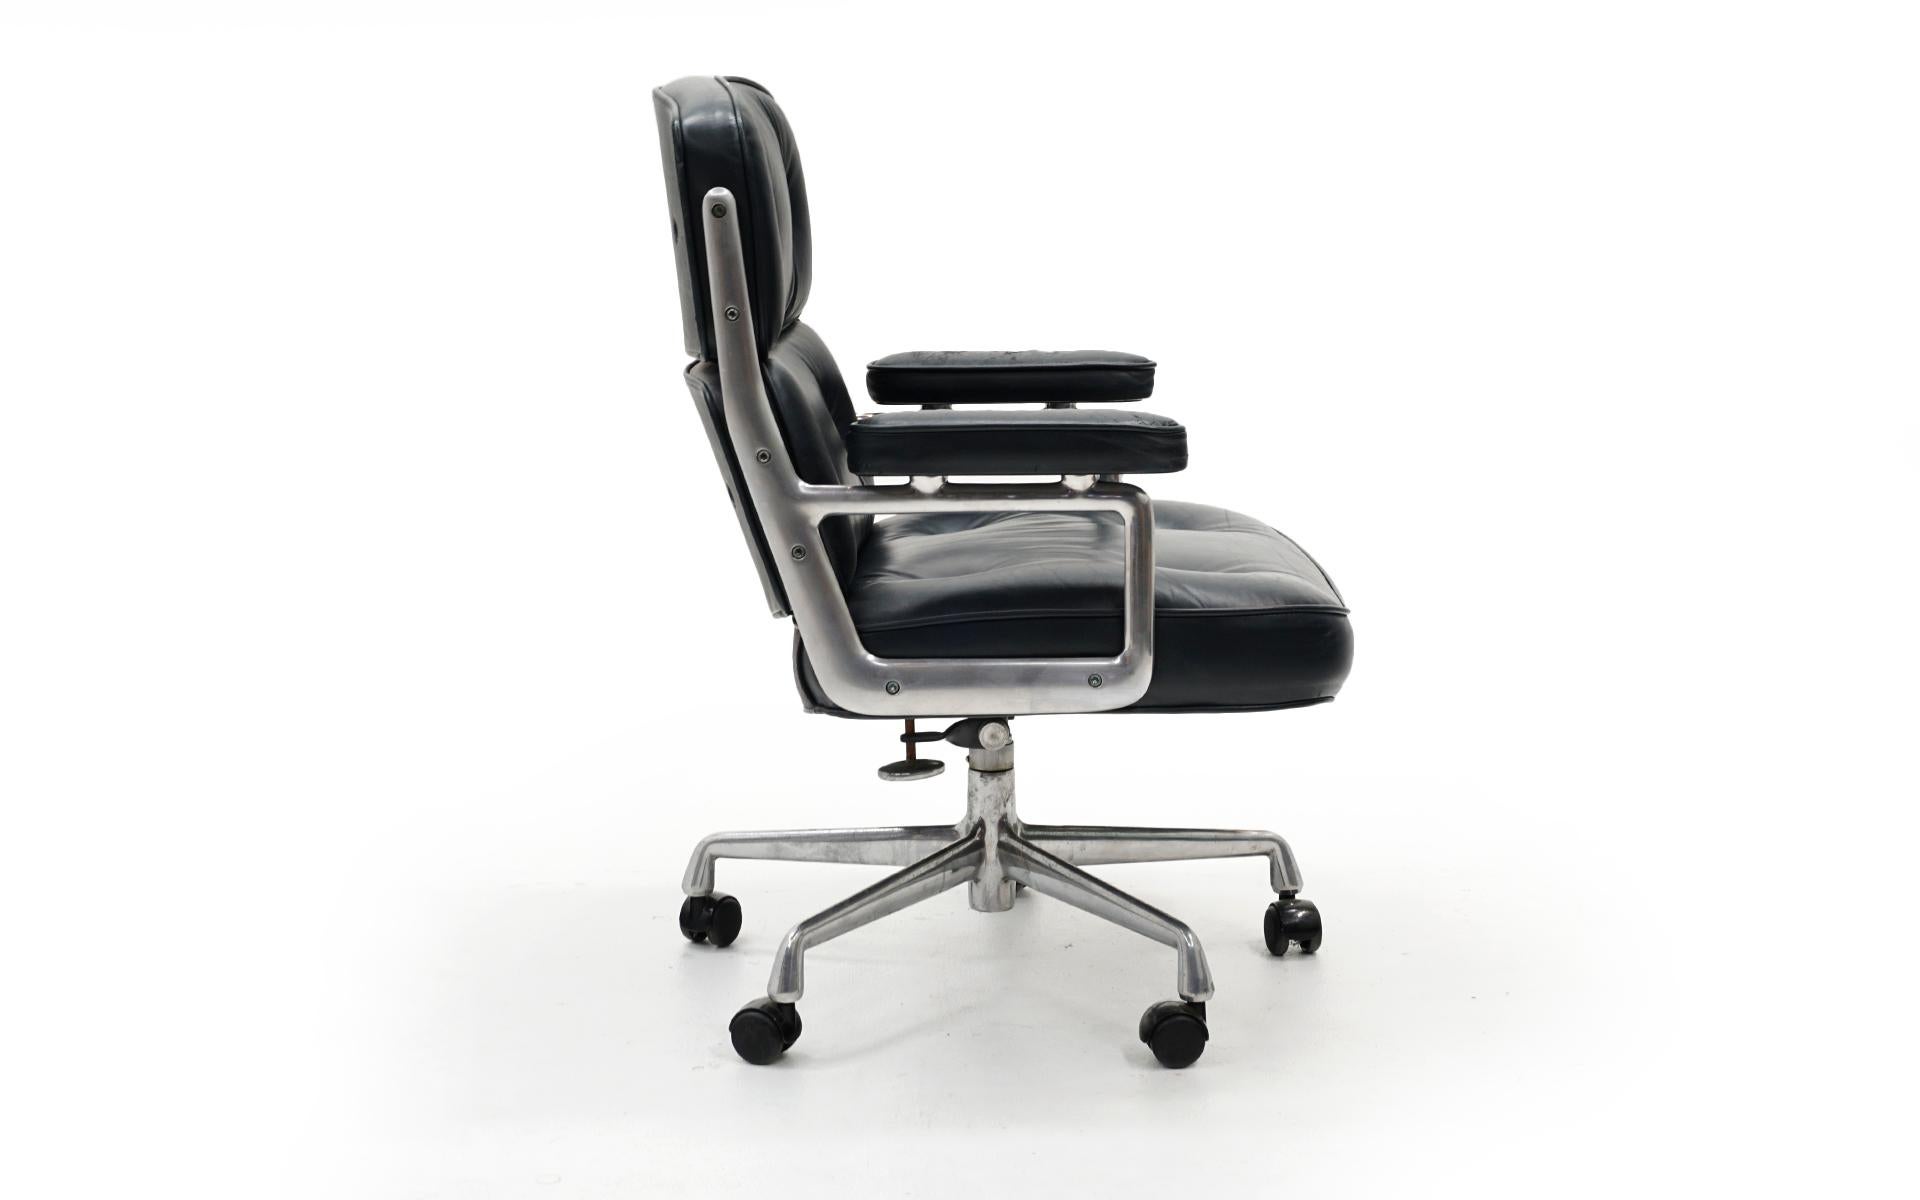 Eames time life chair is dark blue grey leather and cast aluminum frame. Five prong base. 1980s original Herman Miller production. See photos for wear on one arm which does not interfere with function or the overall beauty of this chair in this rare